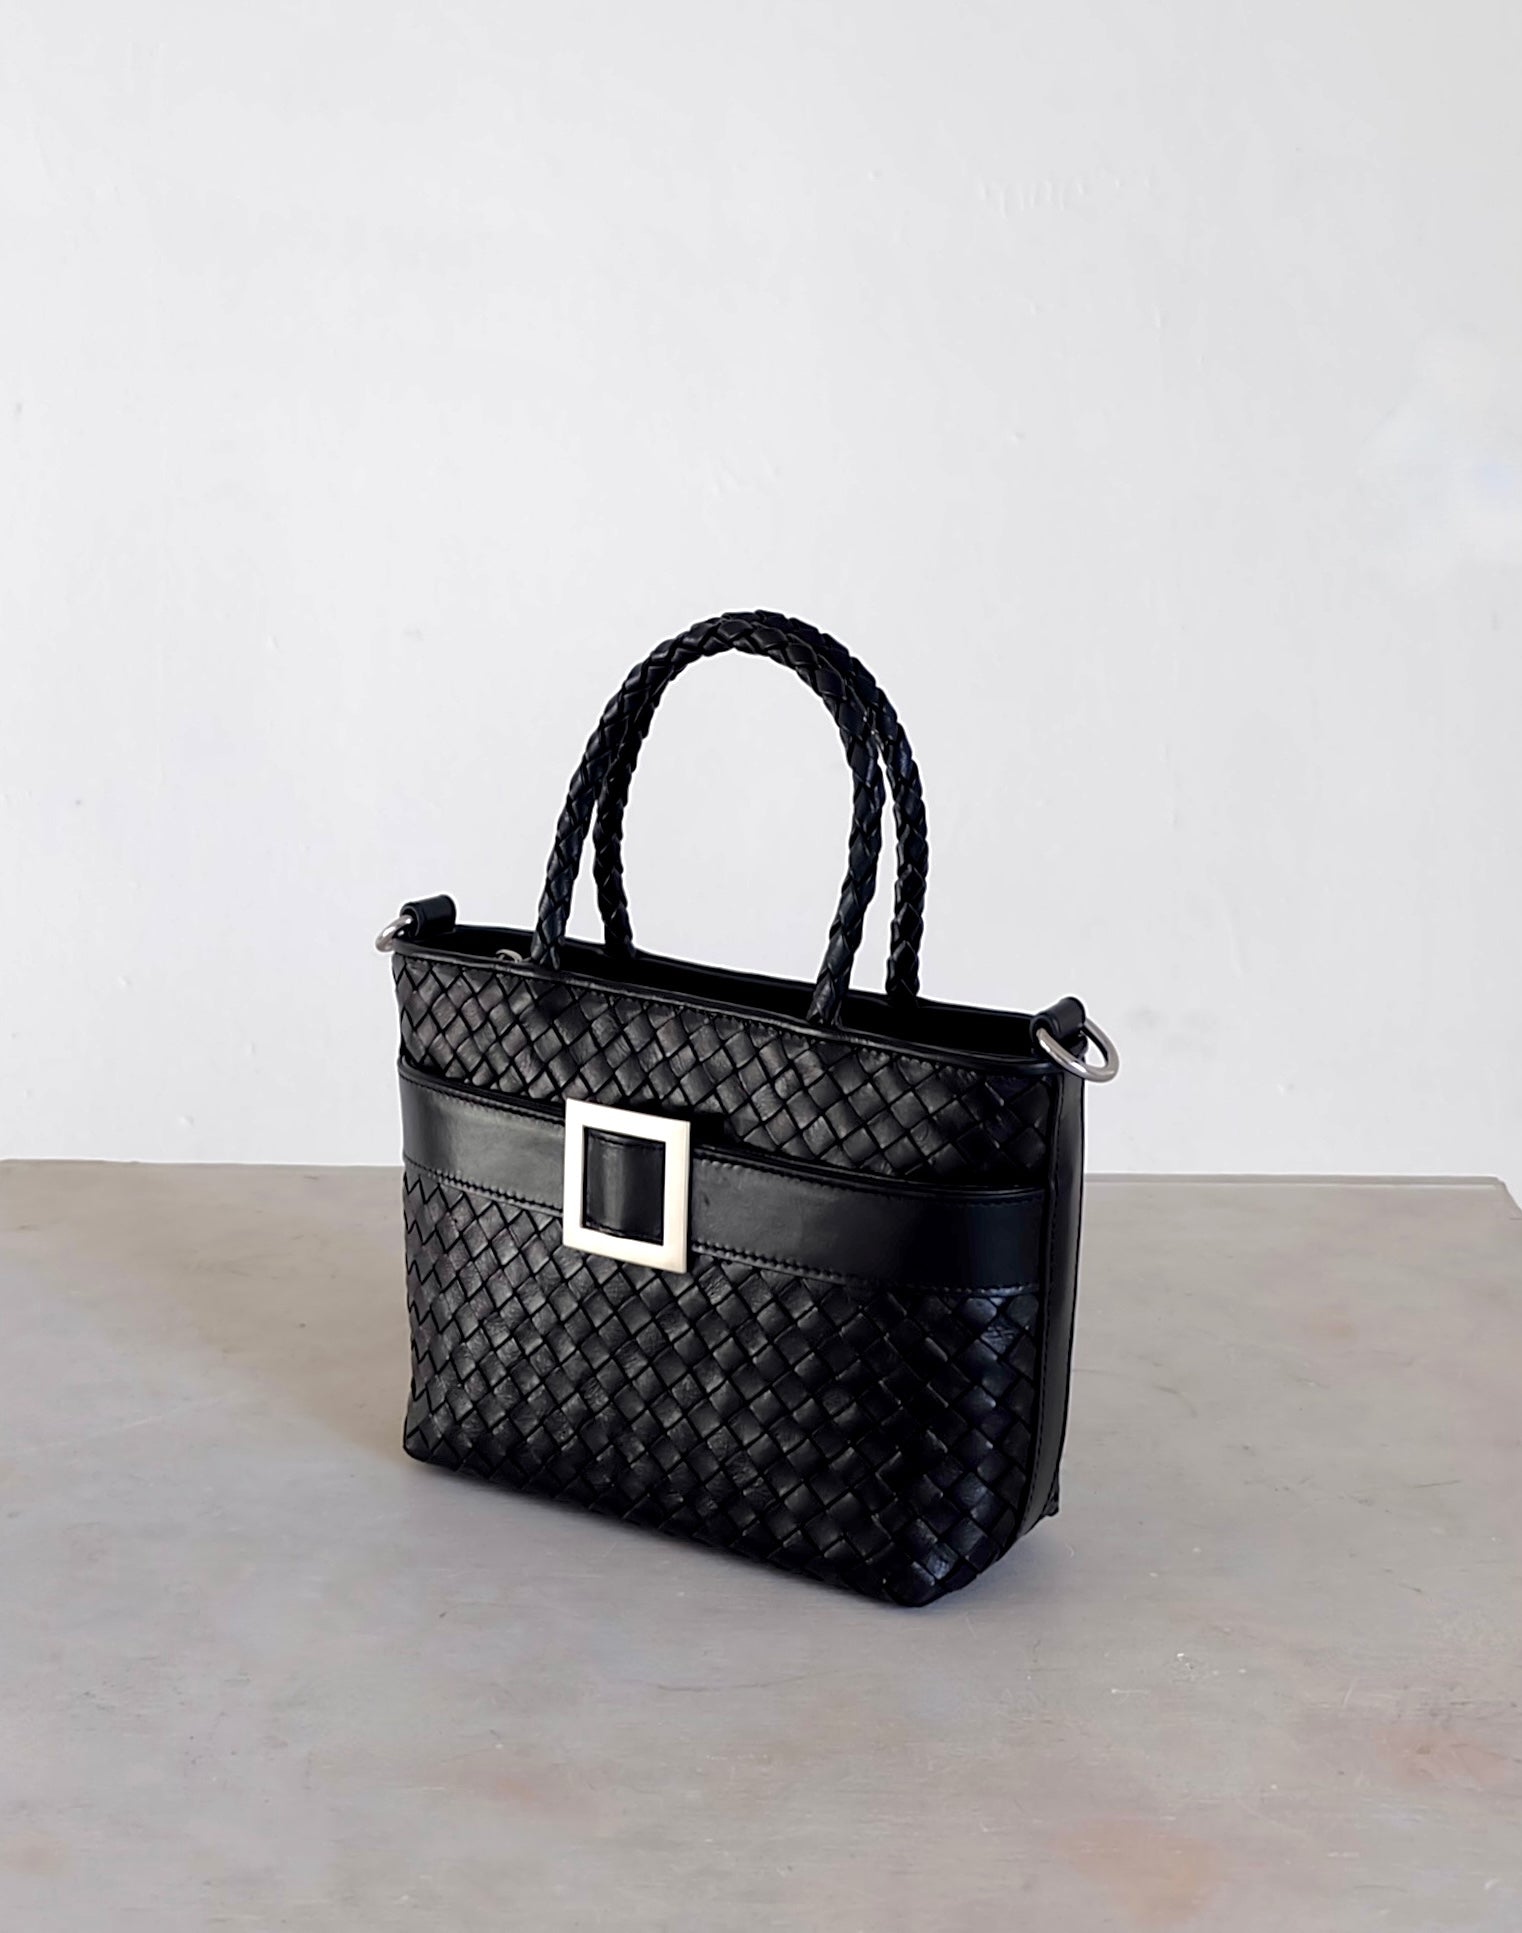 Sustainable Italian leather designer handbag in charcoal black. Braided mini tote bag and crossbody in one, with accent buckle and front compartment.